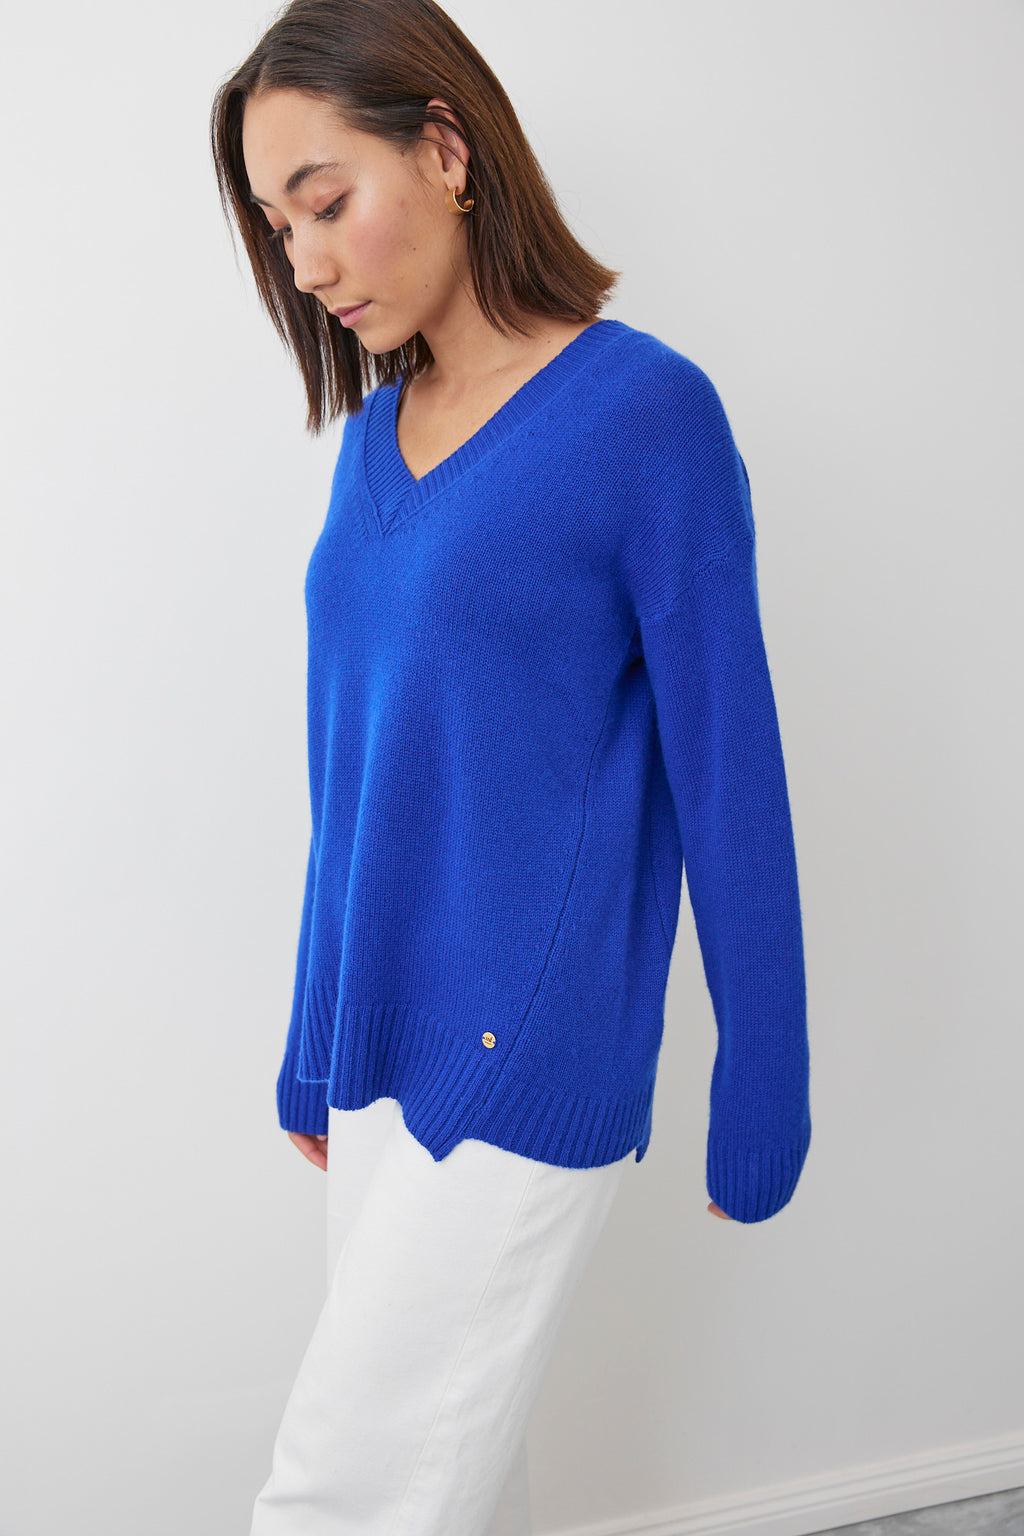 MIA FRATINO MAEVE SLOUCH VEE | ESCAPE CLOTHING | CASHMERE KNIT TOPS